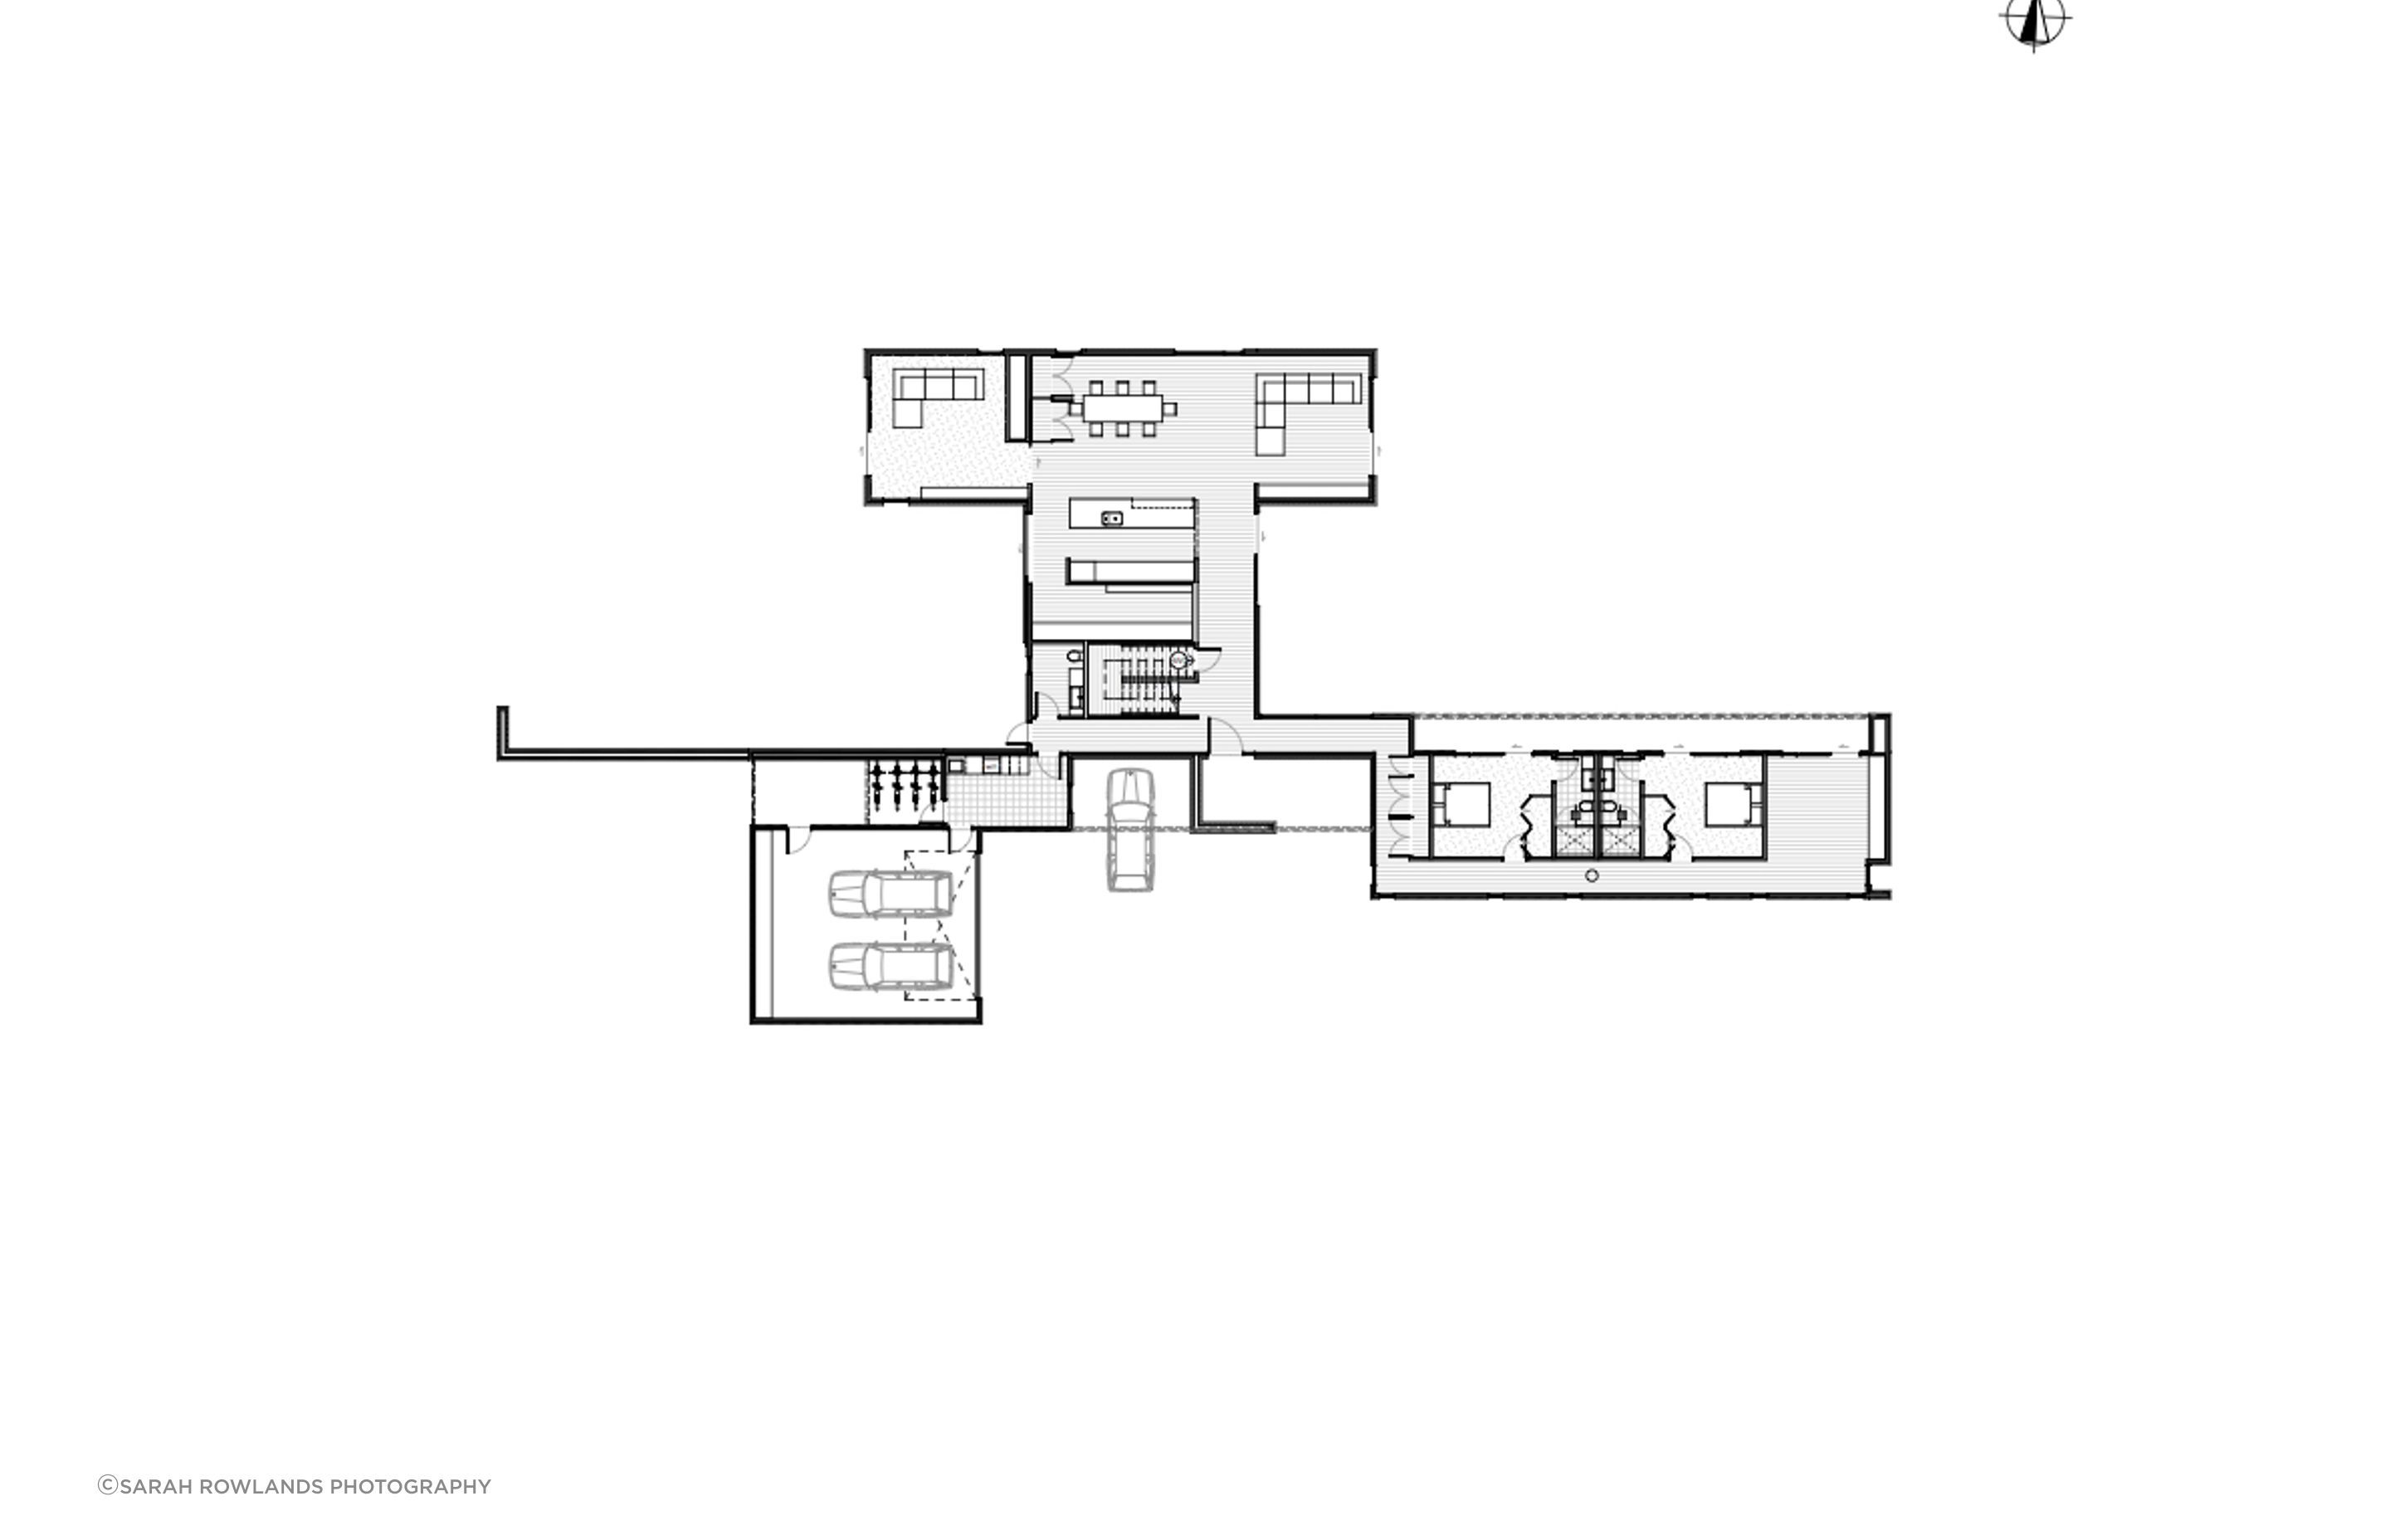 Ground-floor plan by Arthouse Architects.